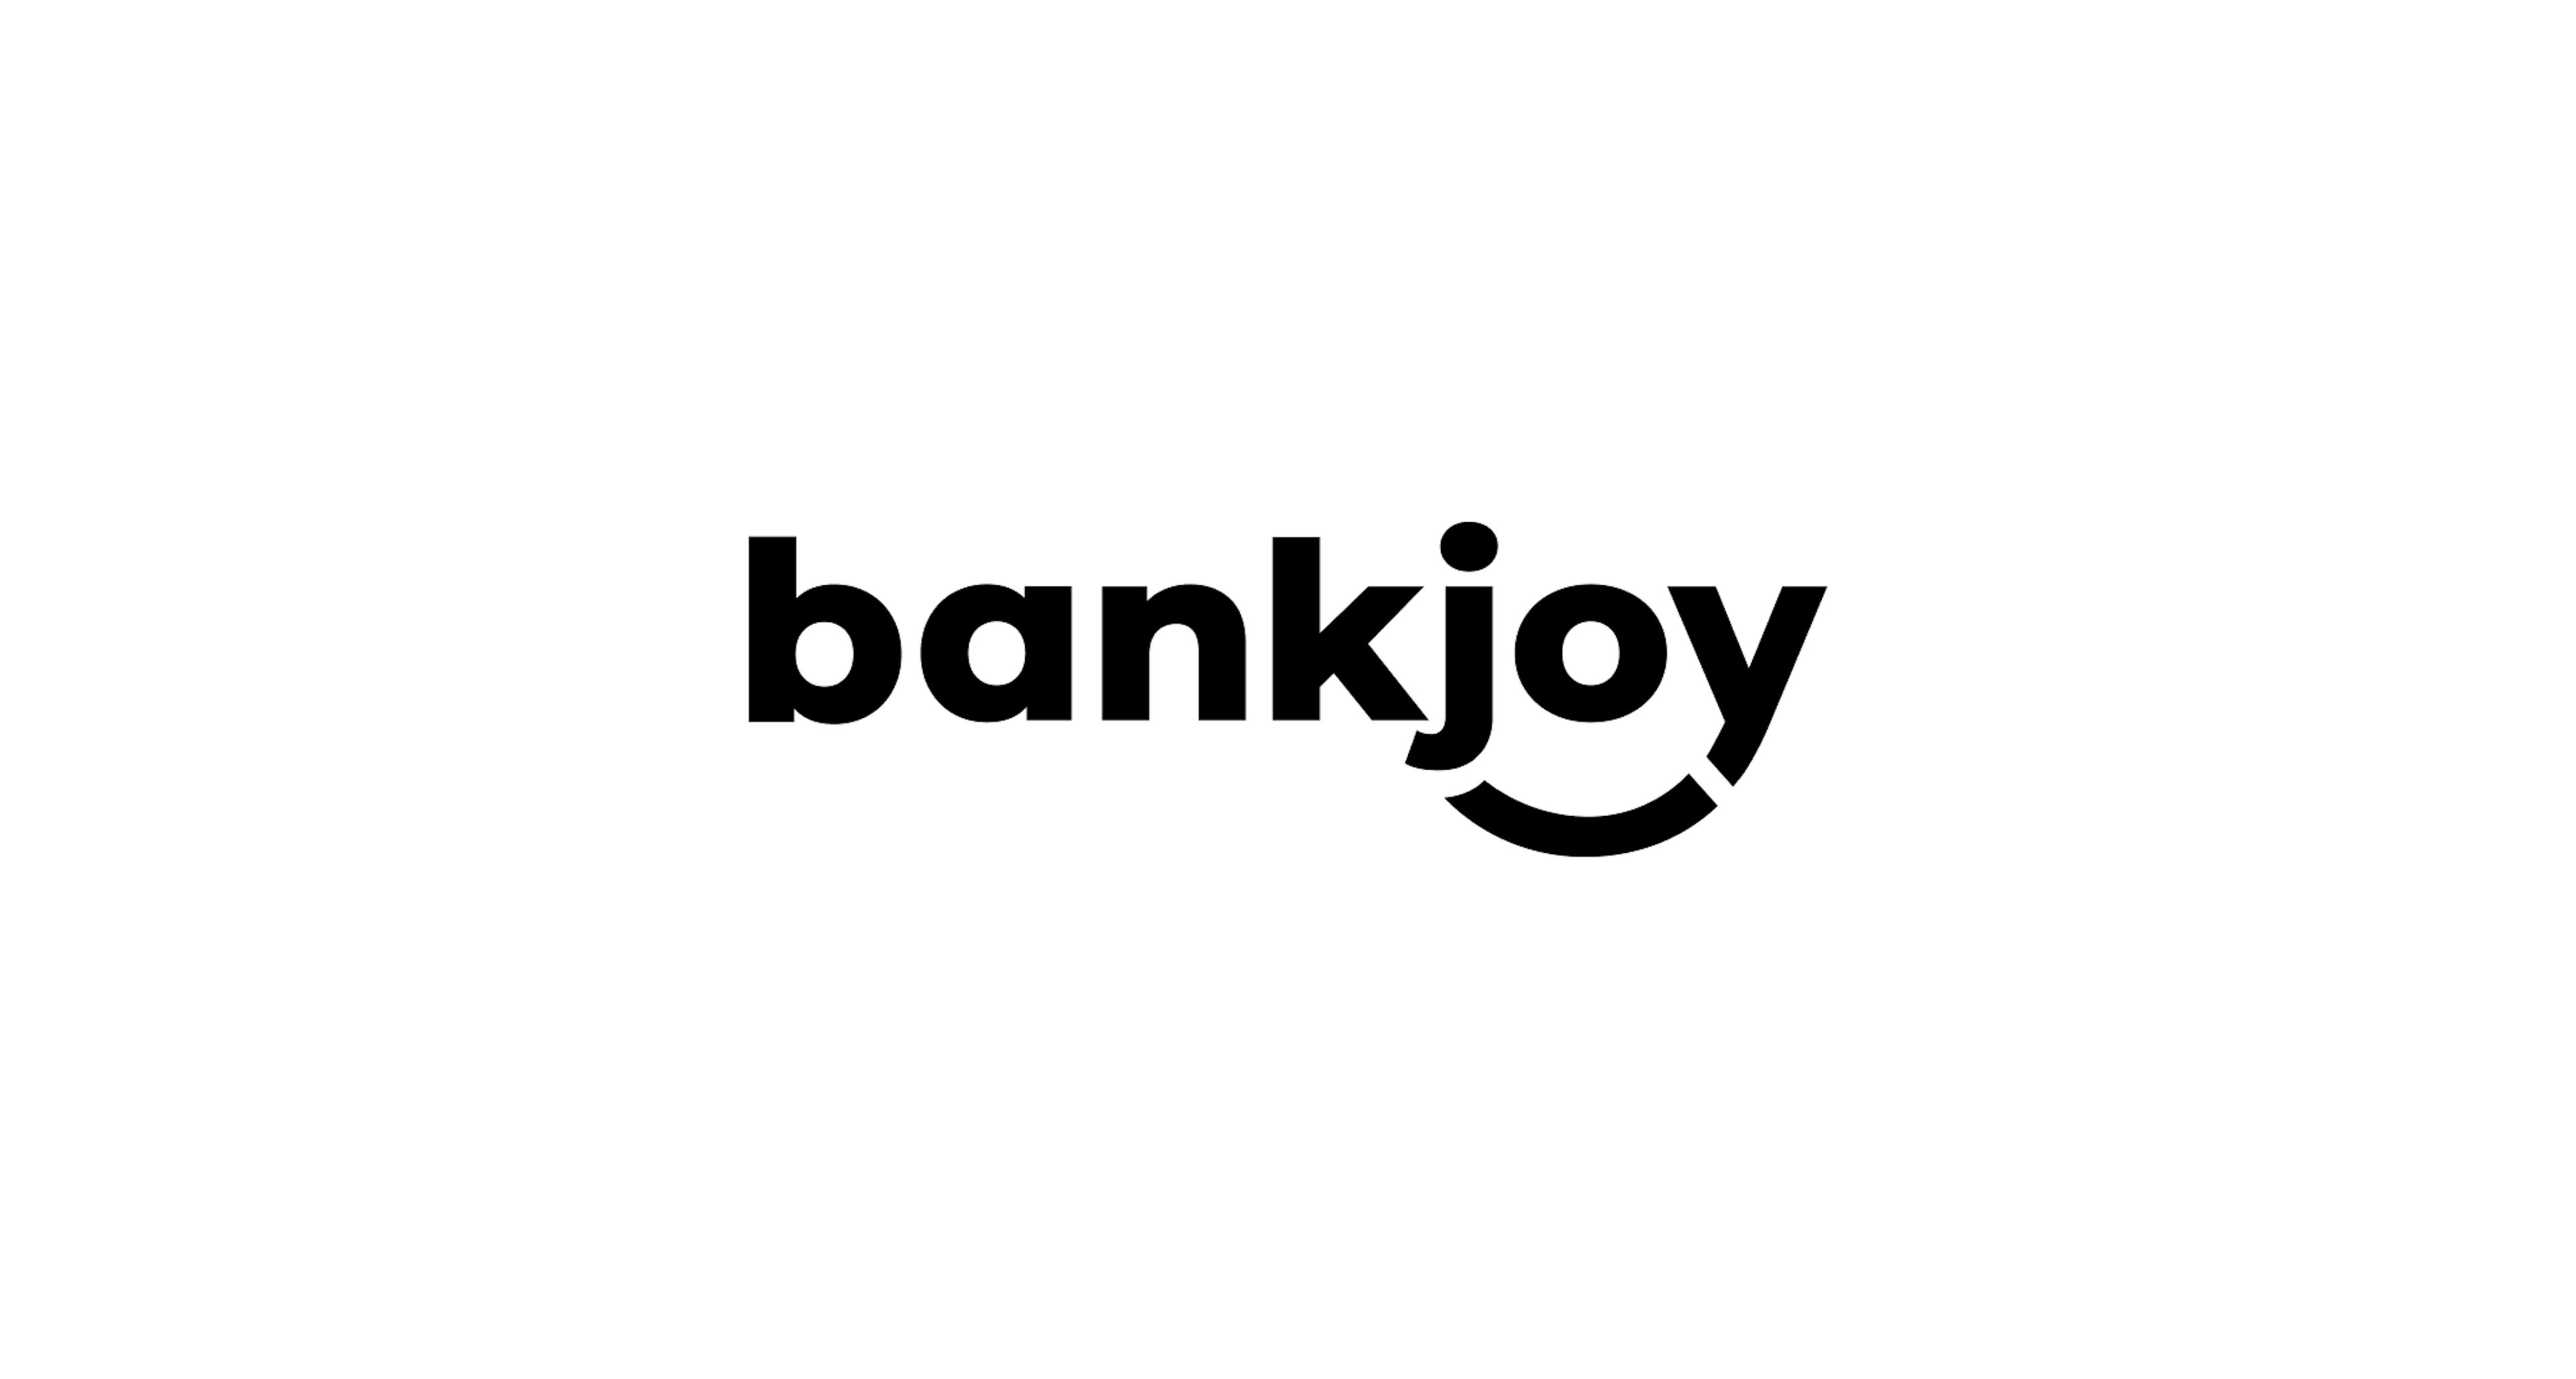 Bankjoy logo concept by another agency